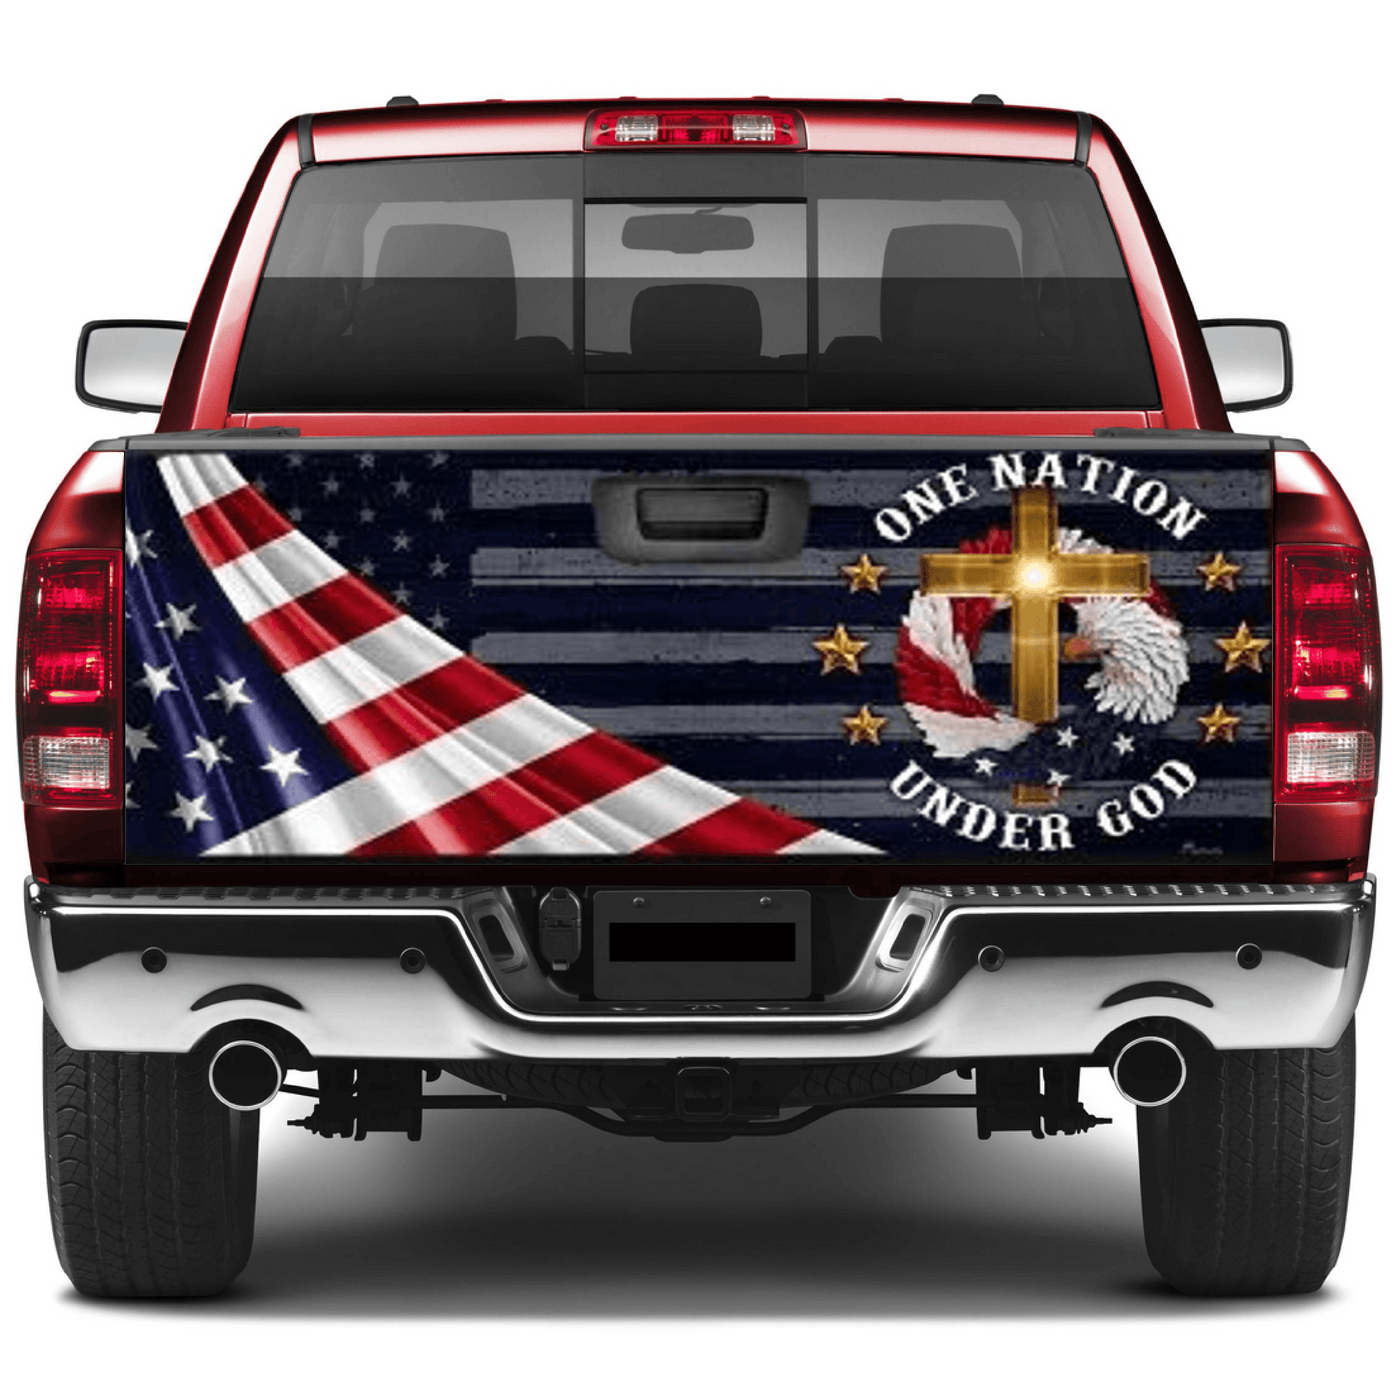 American Flag Tailgate Wrap One Nation Under God Wraps For Trucks Wrap Vinyl Car Decals SUV Sticker